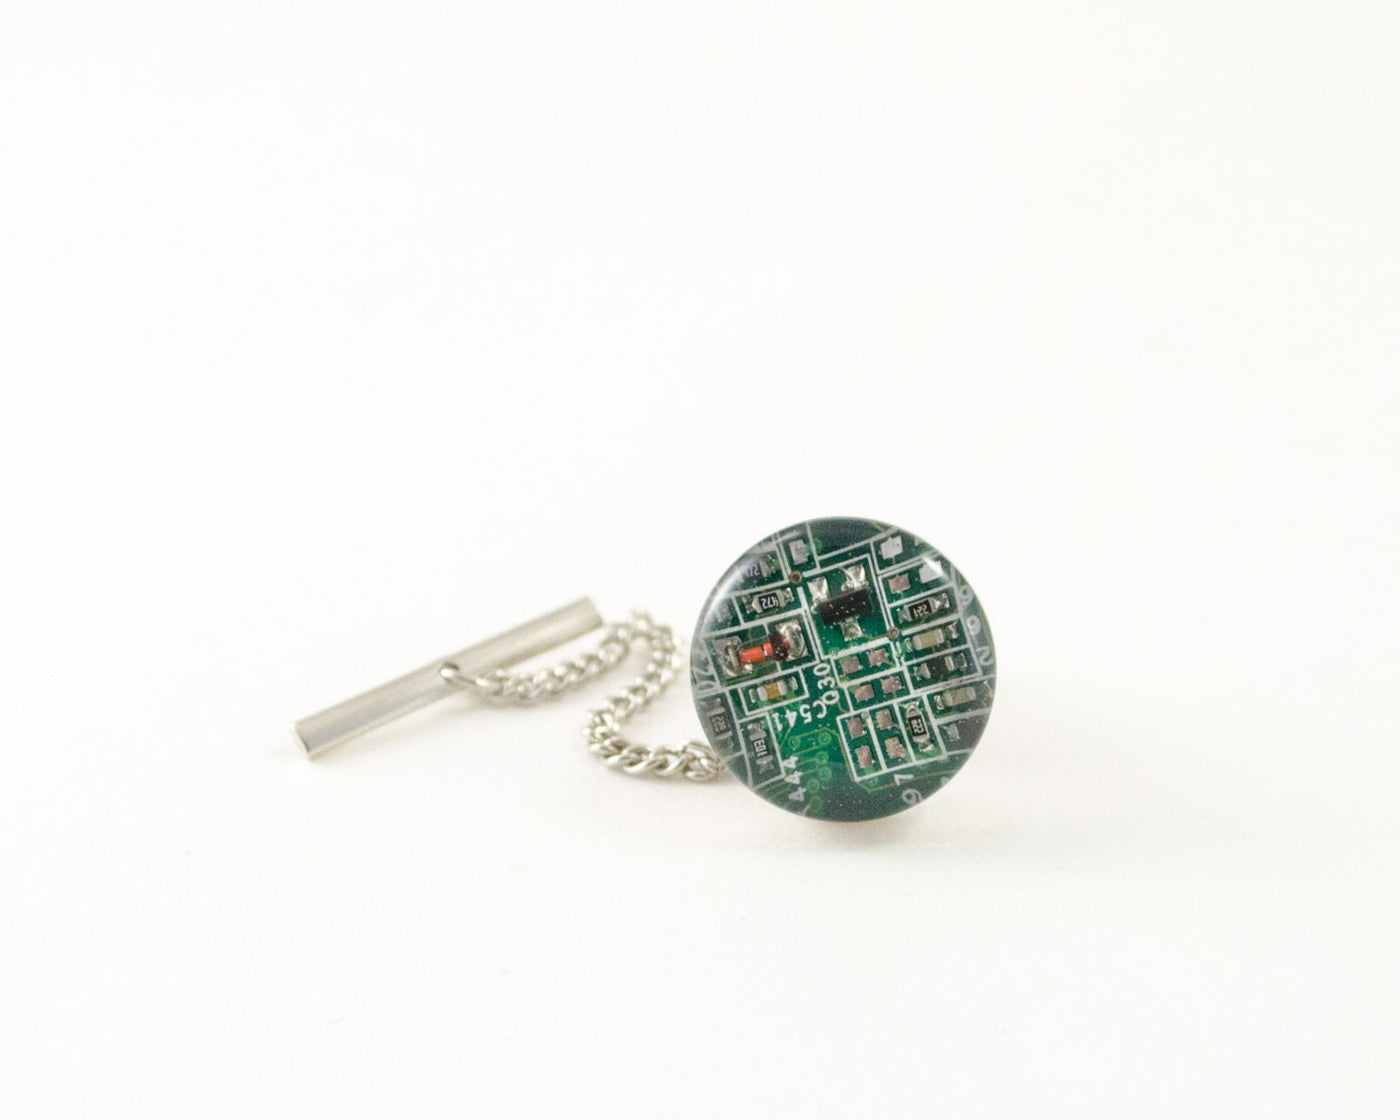 Green Circuit Board Tie Tack, Nerdy Computer Jewelry, Circuit Board Jewelry, Tech Gift, Upcycled, Wearable Technology, Fathers Day Gift